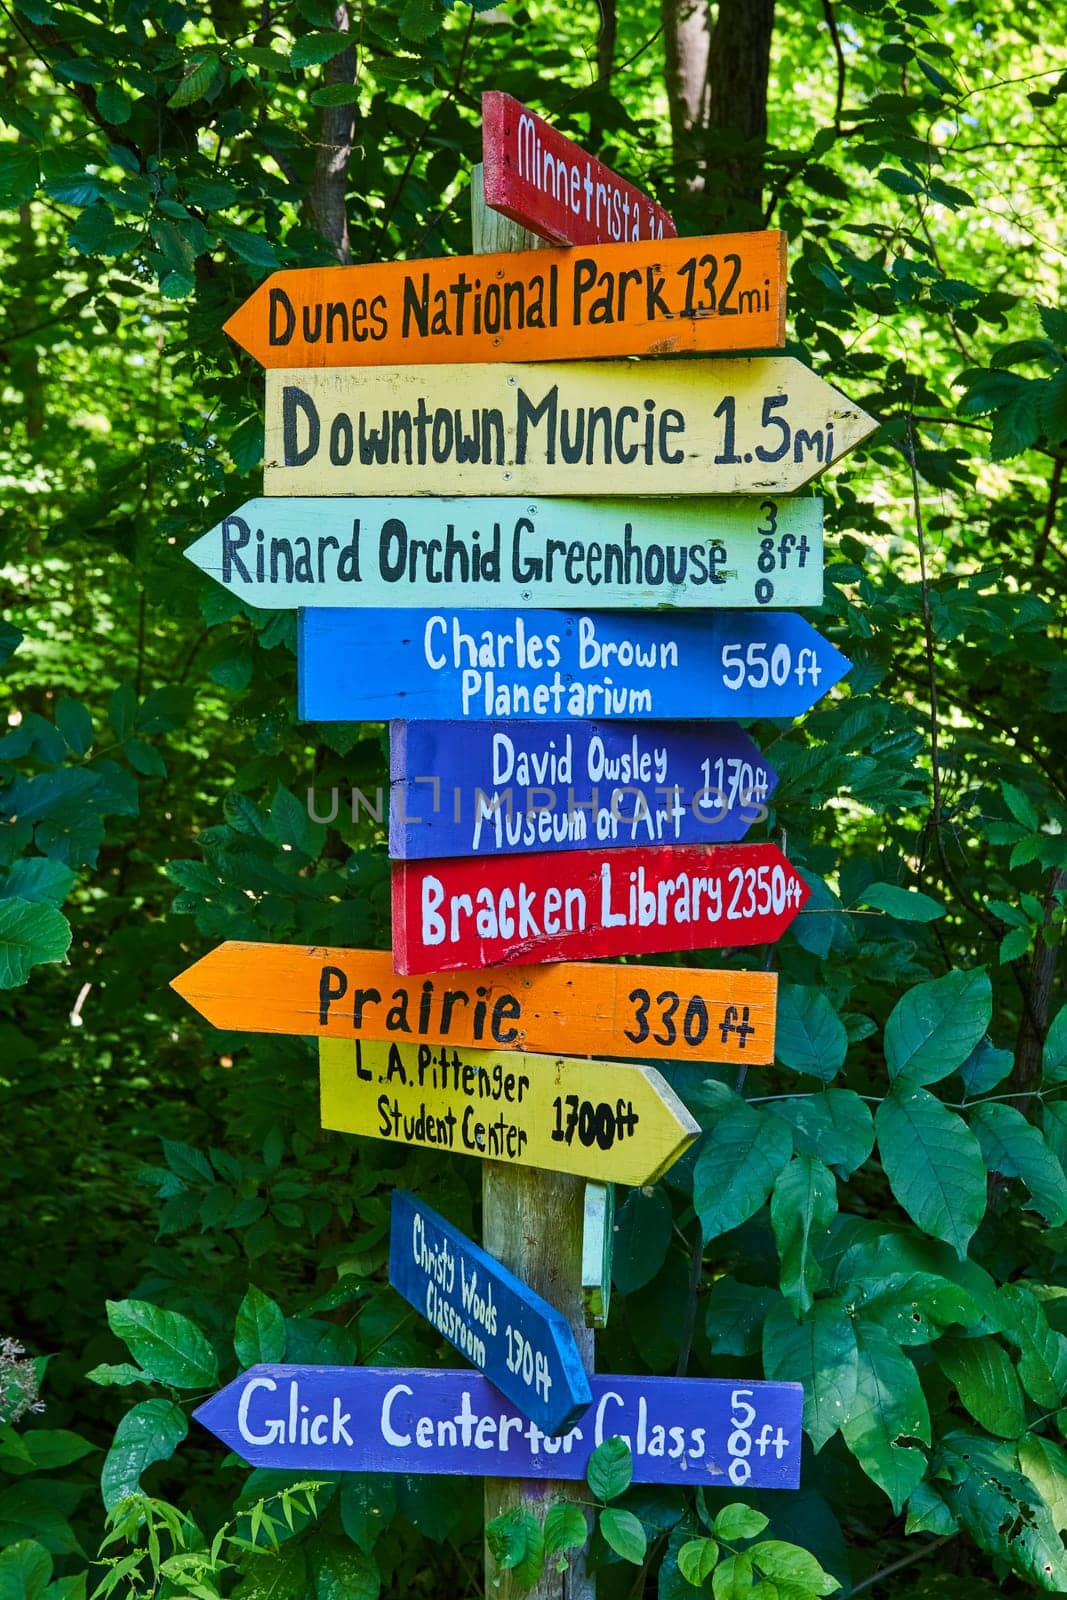 Vibrantly colored signpost at Muncie, Indiana in 2023, pointing towards local attractions like Dunes National Park, Downtown Muncie, and University landmarks amid lush greenery